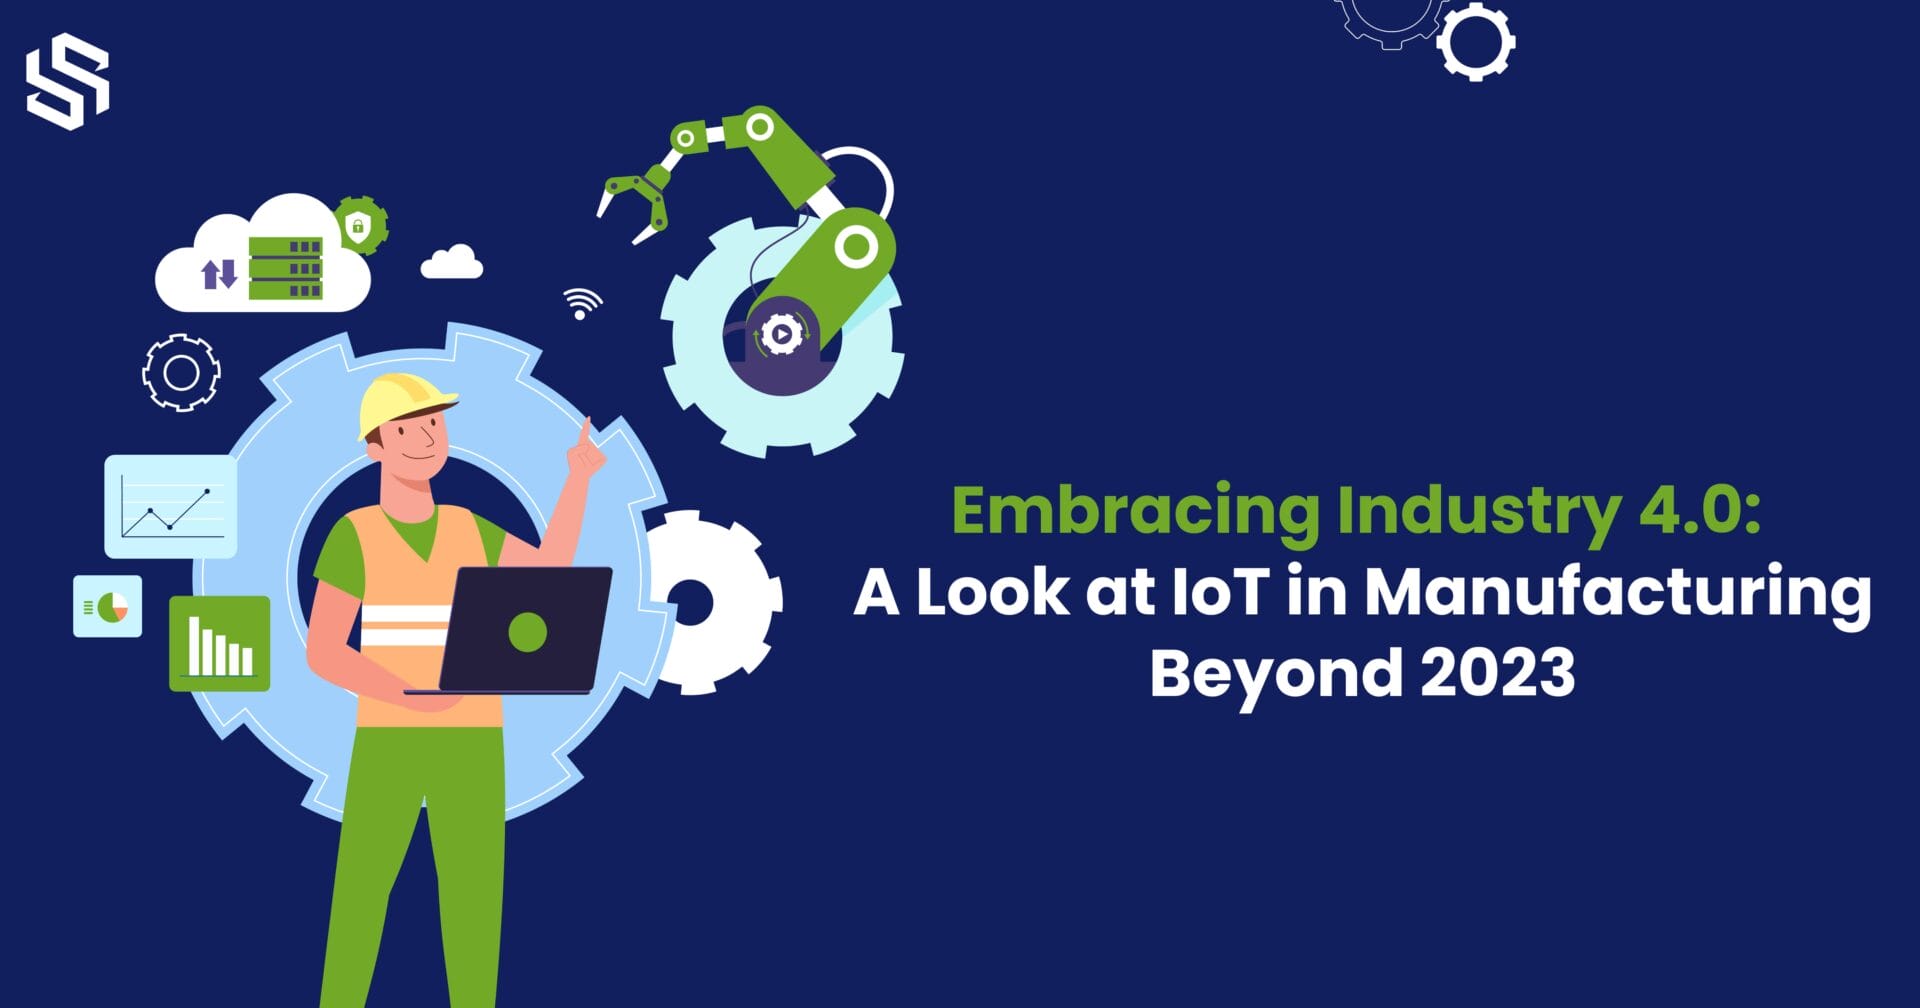 Embracing Industry 4.0 - A Look at IoT in Manufacturing Beyond 2023